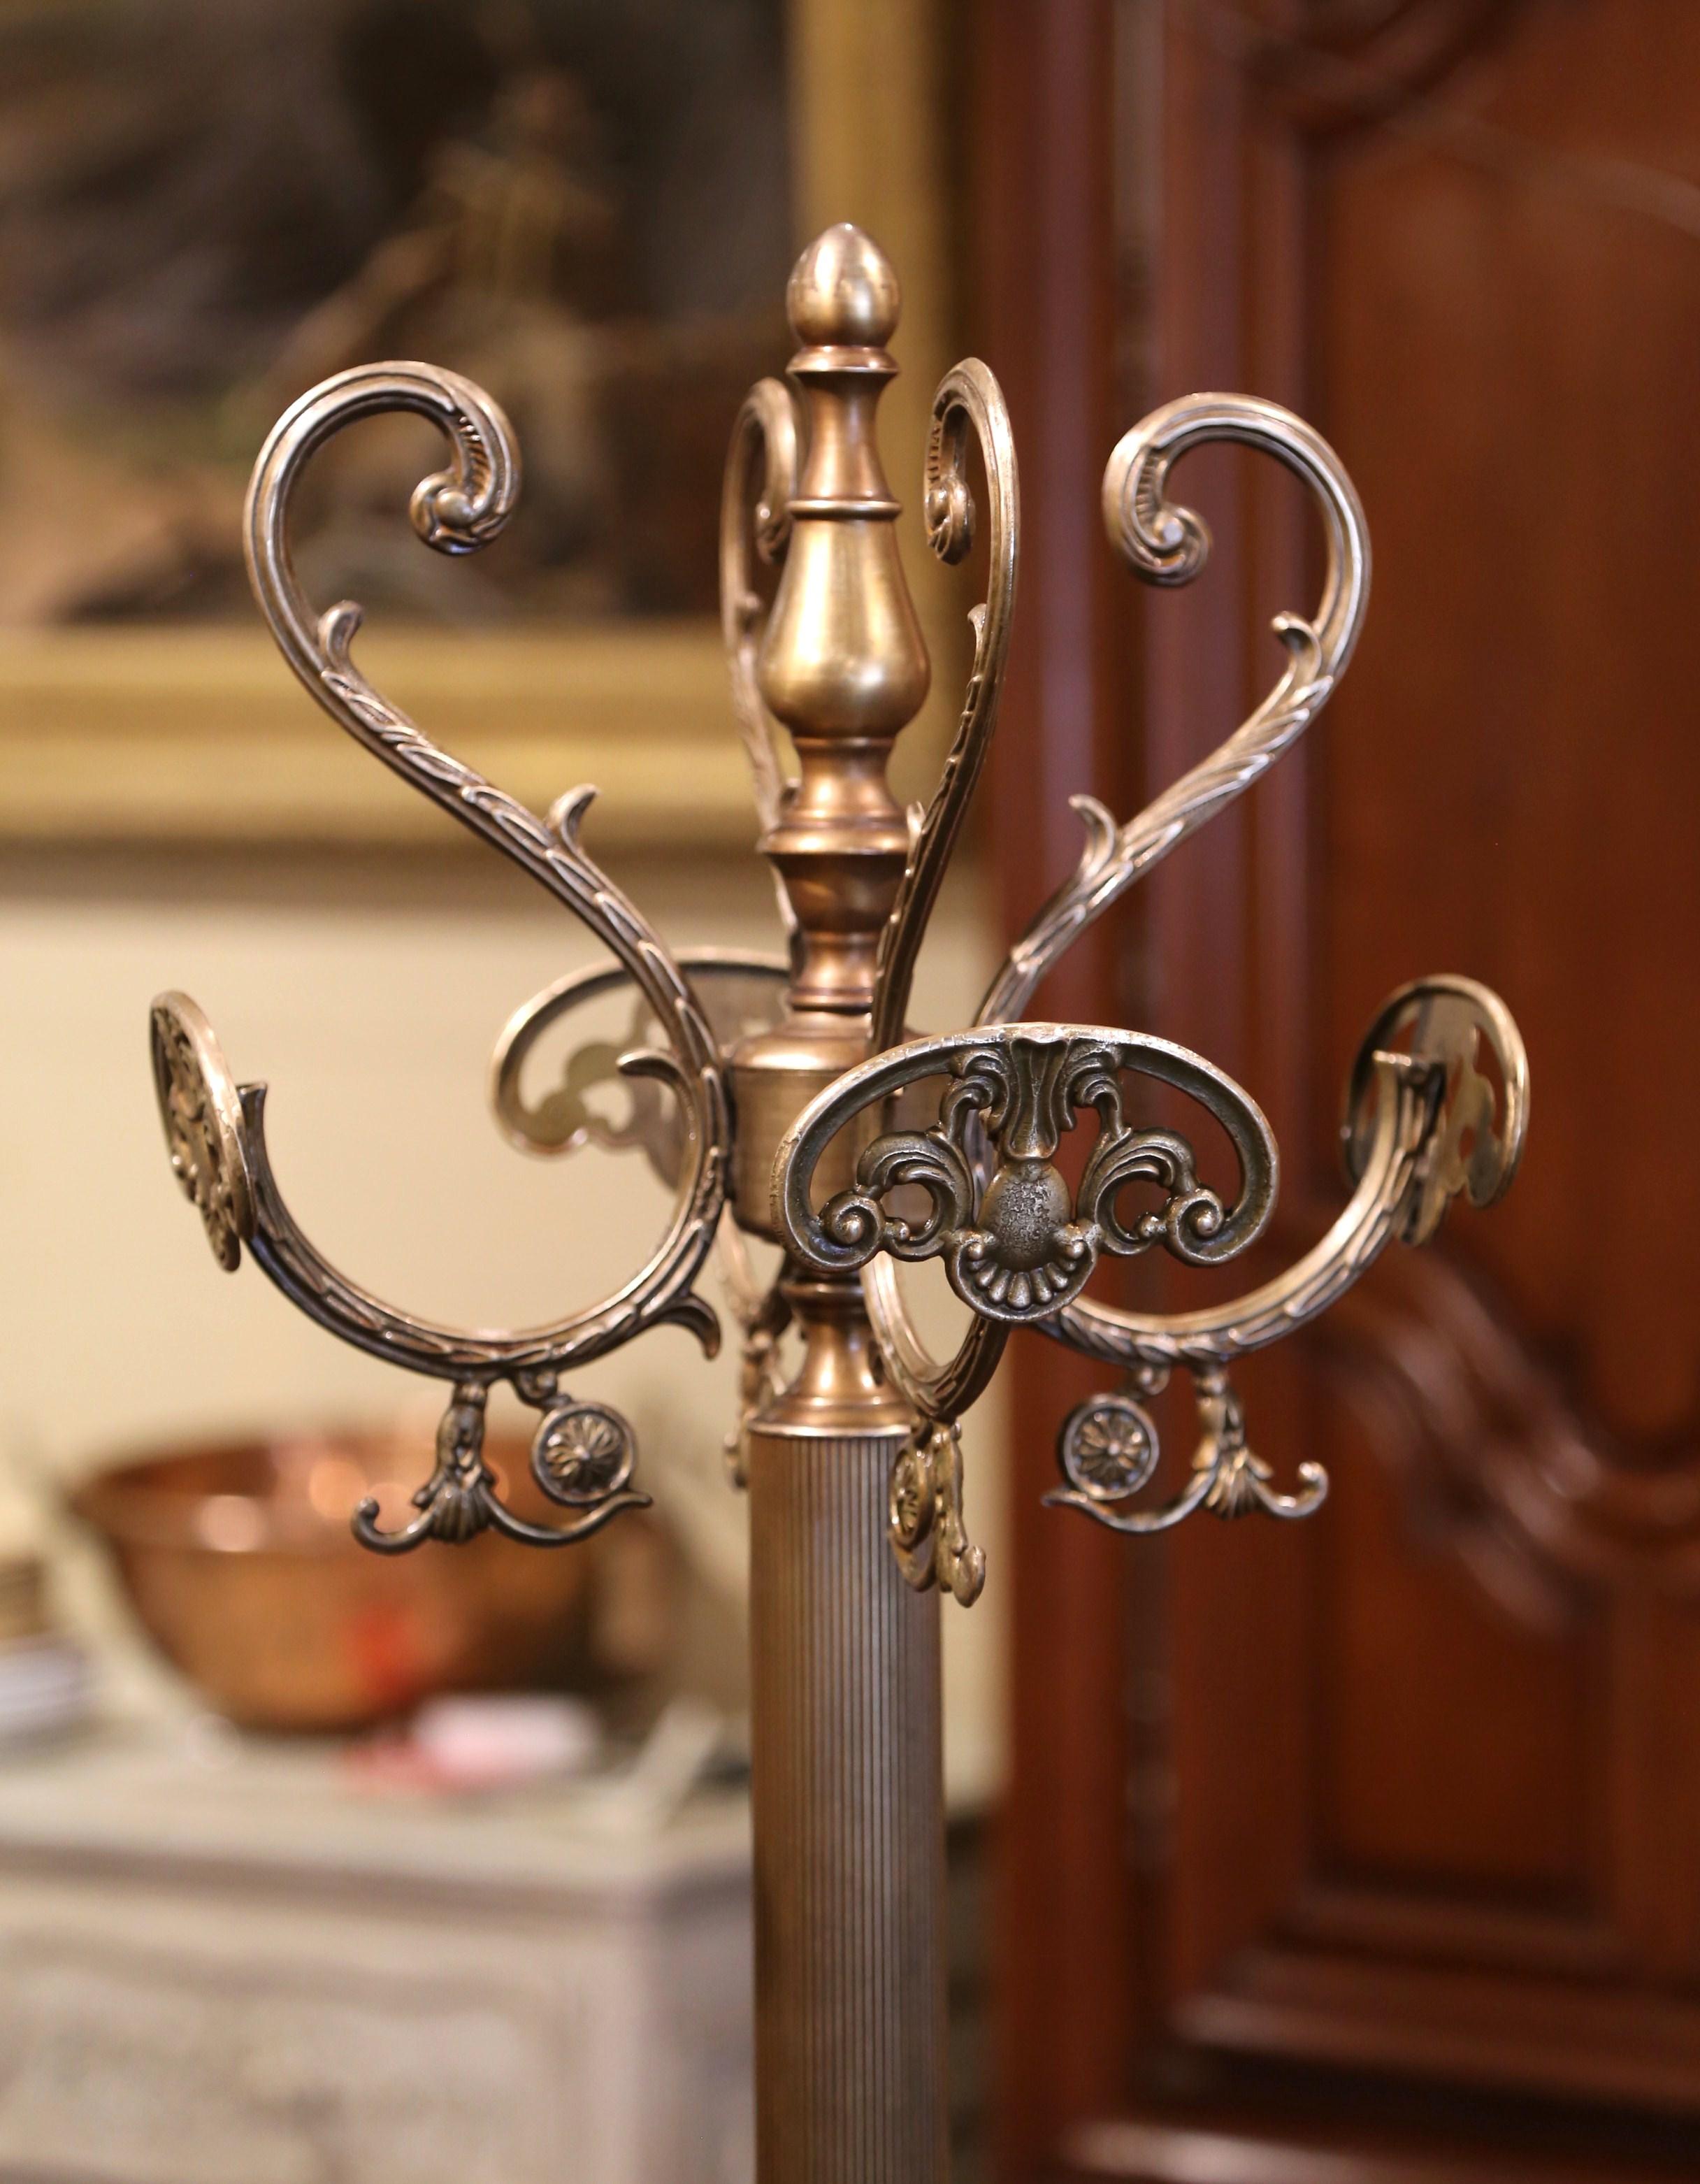 This Italian gilt brass and metal hall tree was crafted in France circa 1920, standing on scrolled feet over a reeded central stem with foliate and scroll work accents, the coat rack features a swivel top with four double arms ending in hat and coat